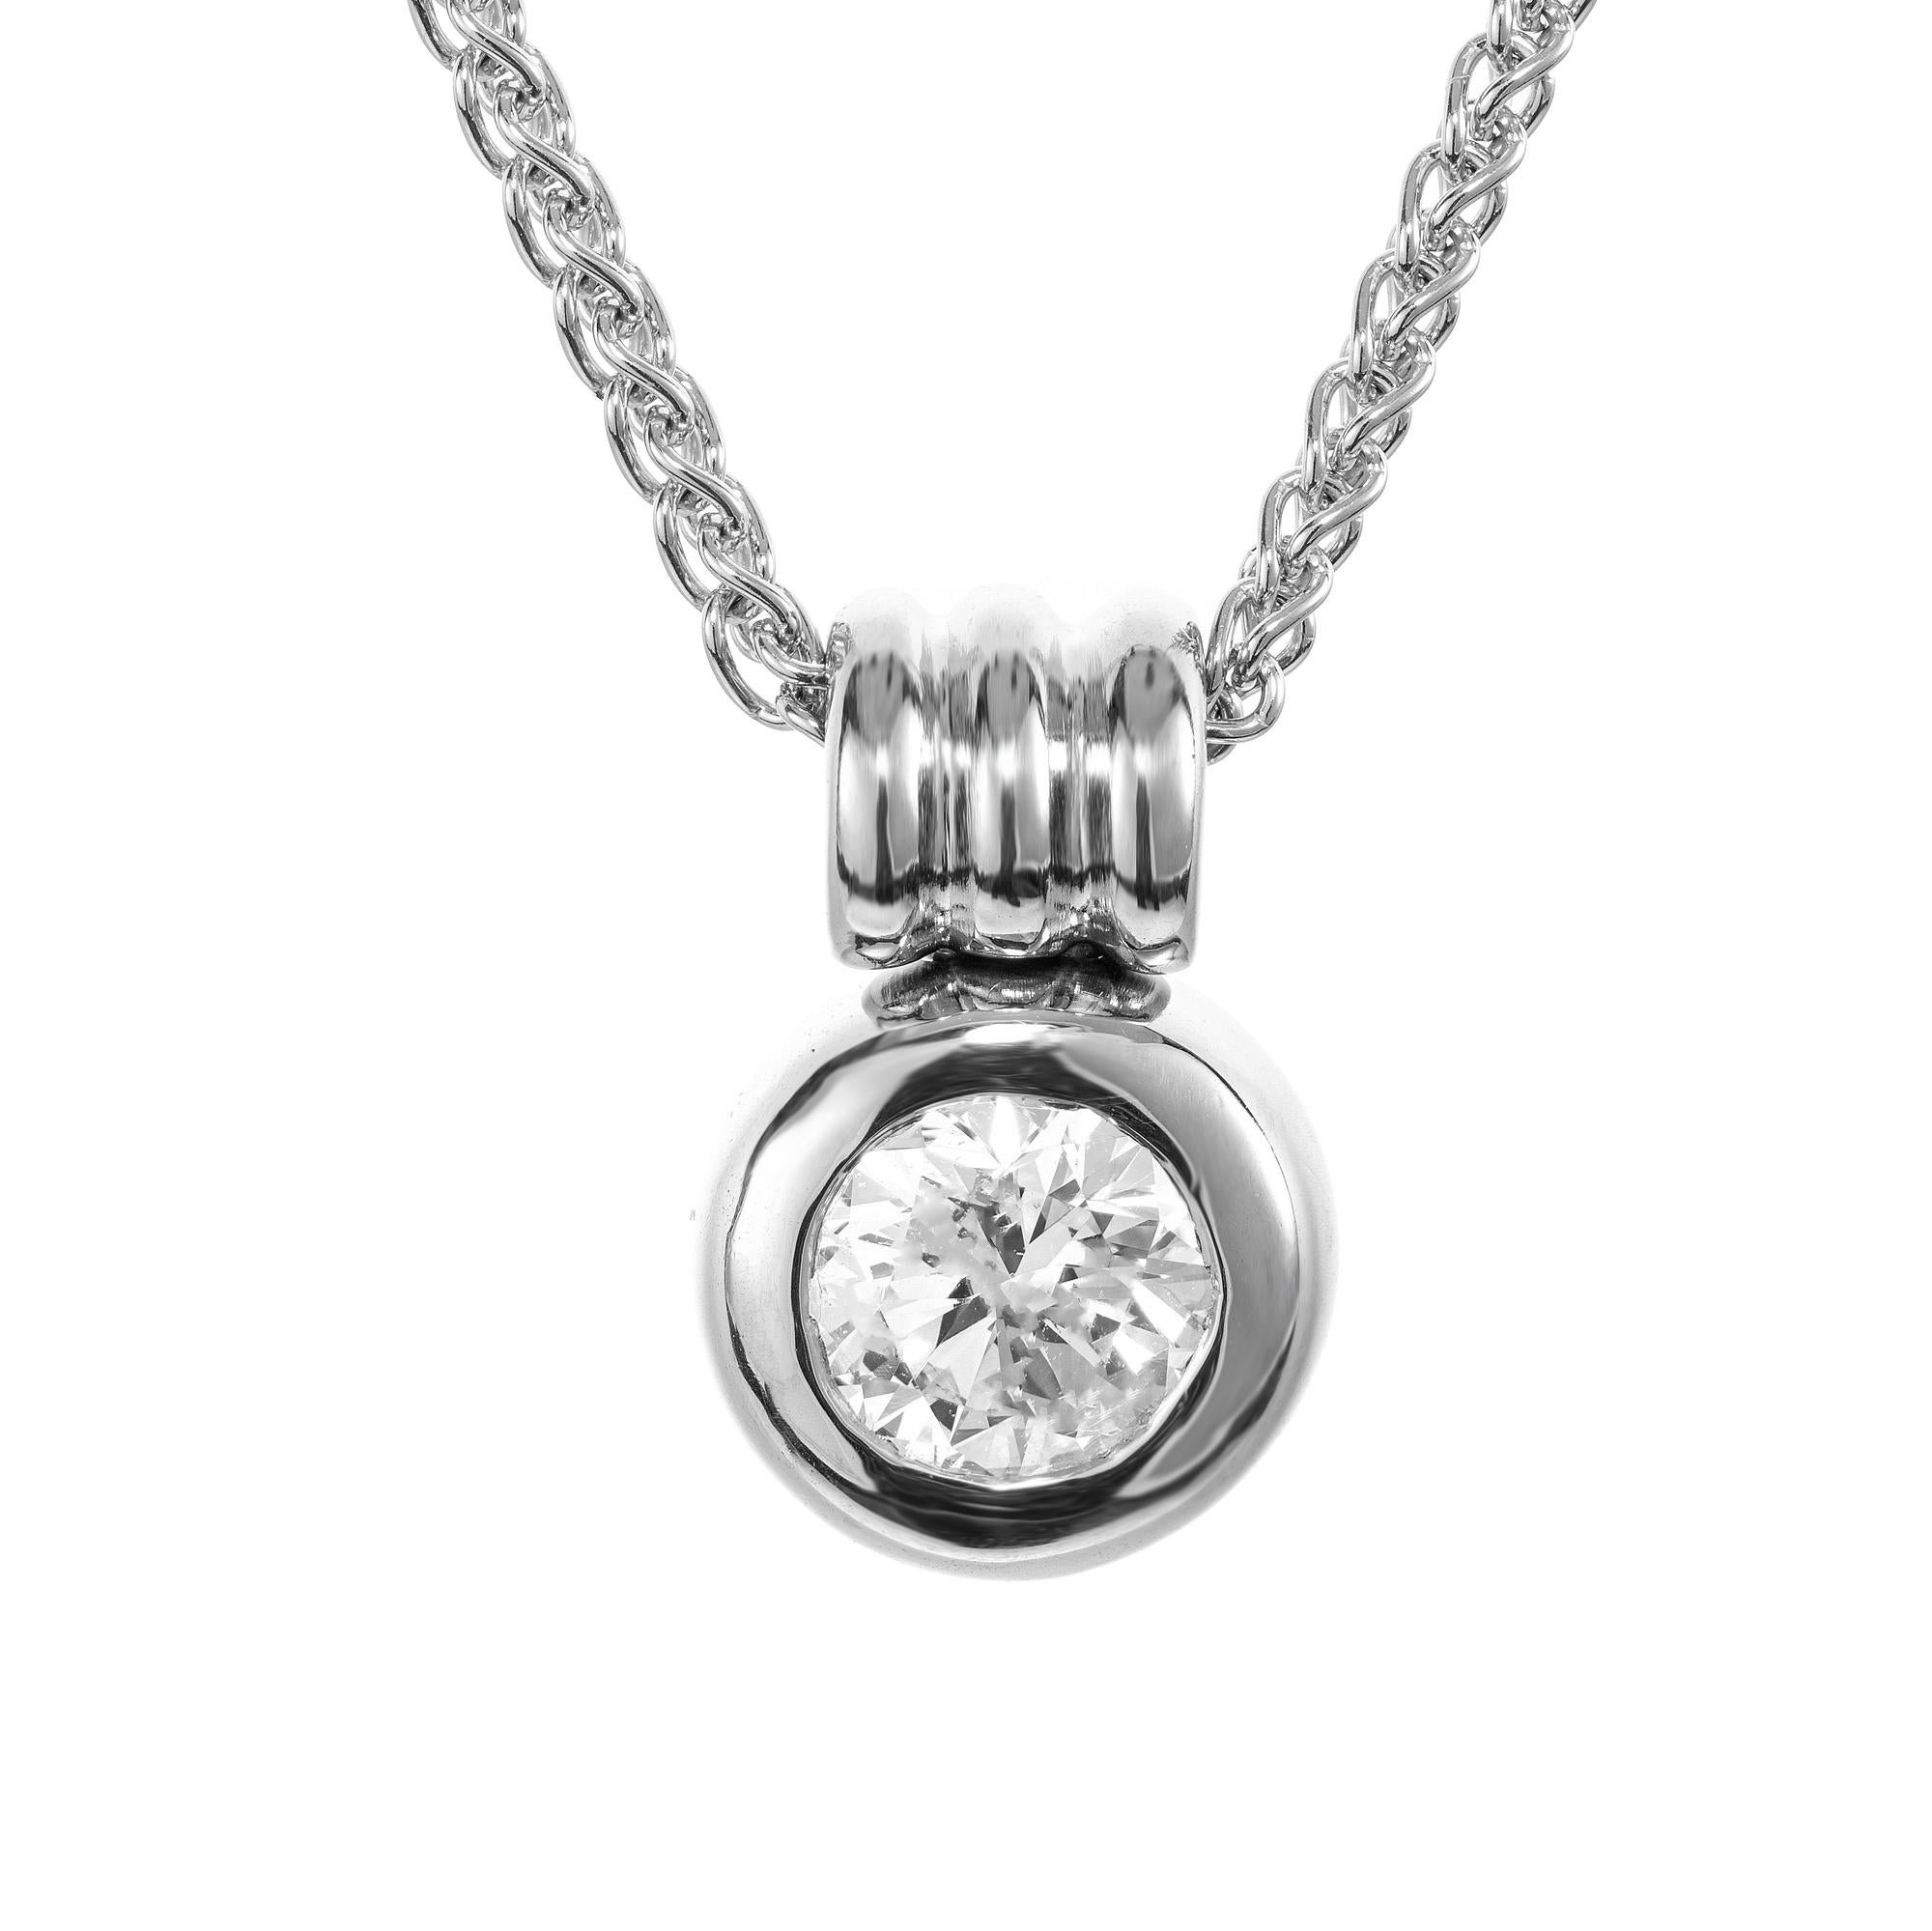 This EGL certified round brilliant cut 1.23ct diamond is in a bezel set 18k white gold setting. The diamond is bright and sparkly face-up with no flaws visible to the eye. The brilliance captures reflecting light from every angle. The sleek white